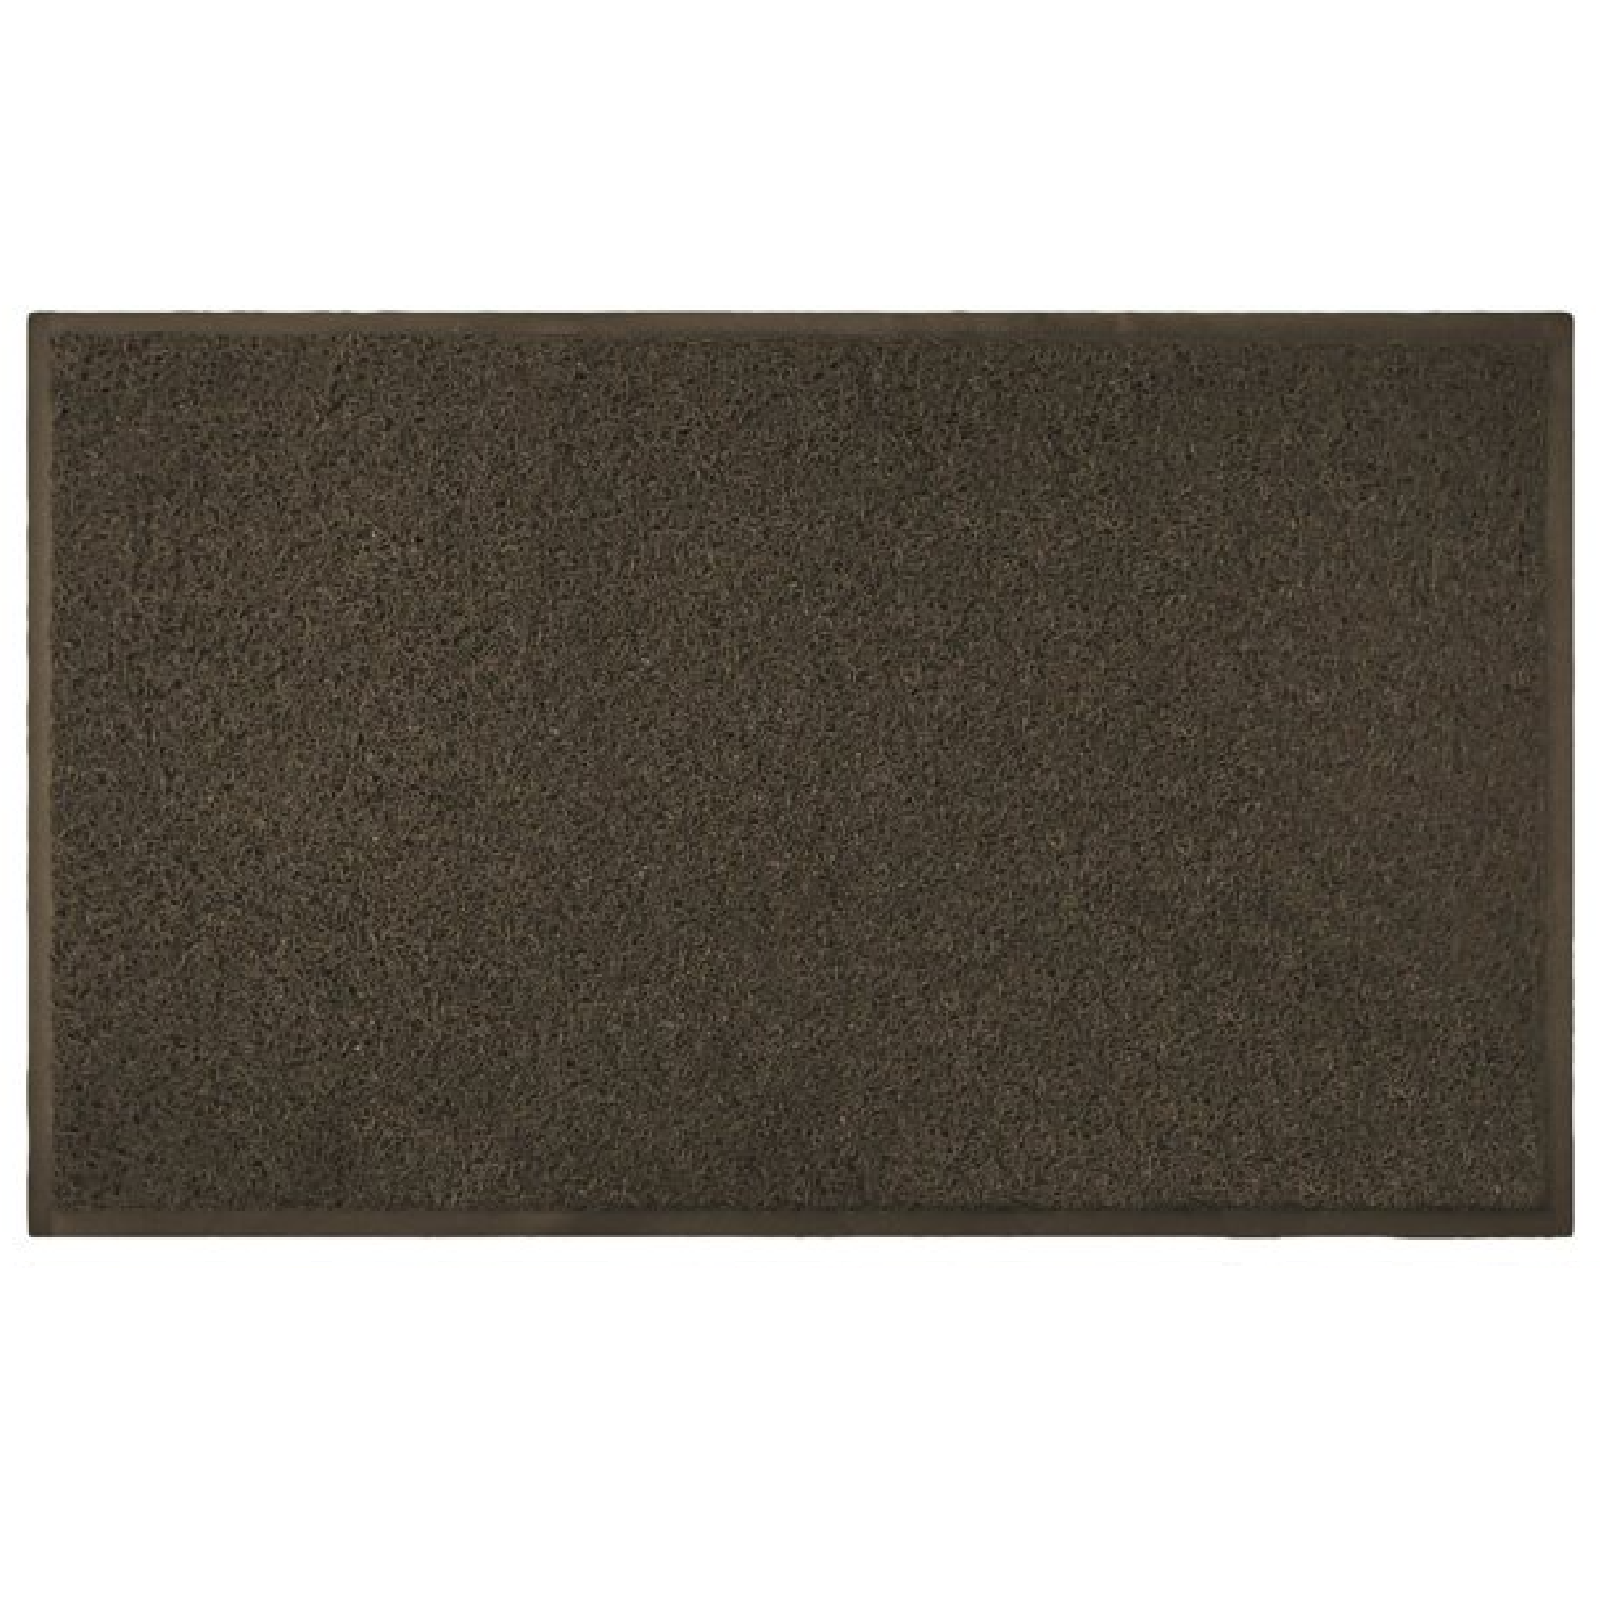 3M Commercial LARGE Sized Nomad Mat With EDGING 48" X 72" (120CM X 183CM) BROWN